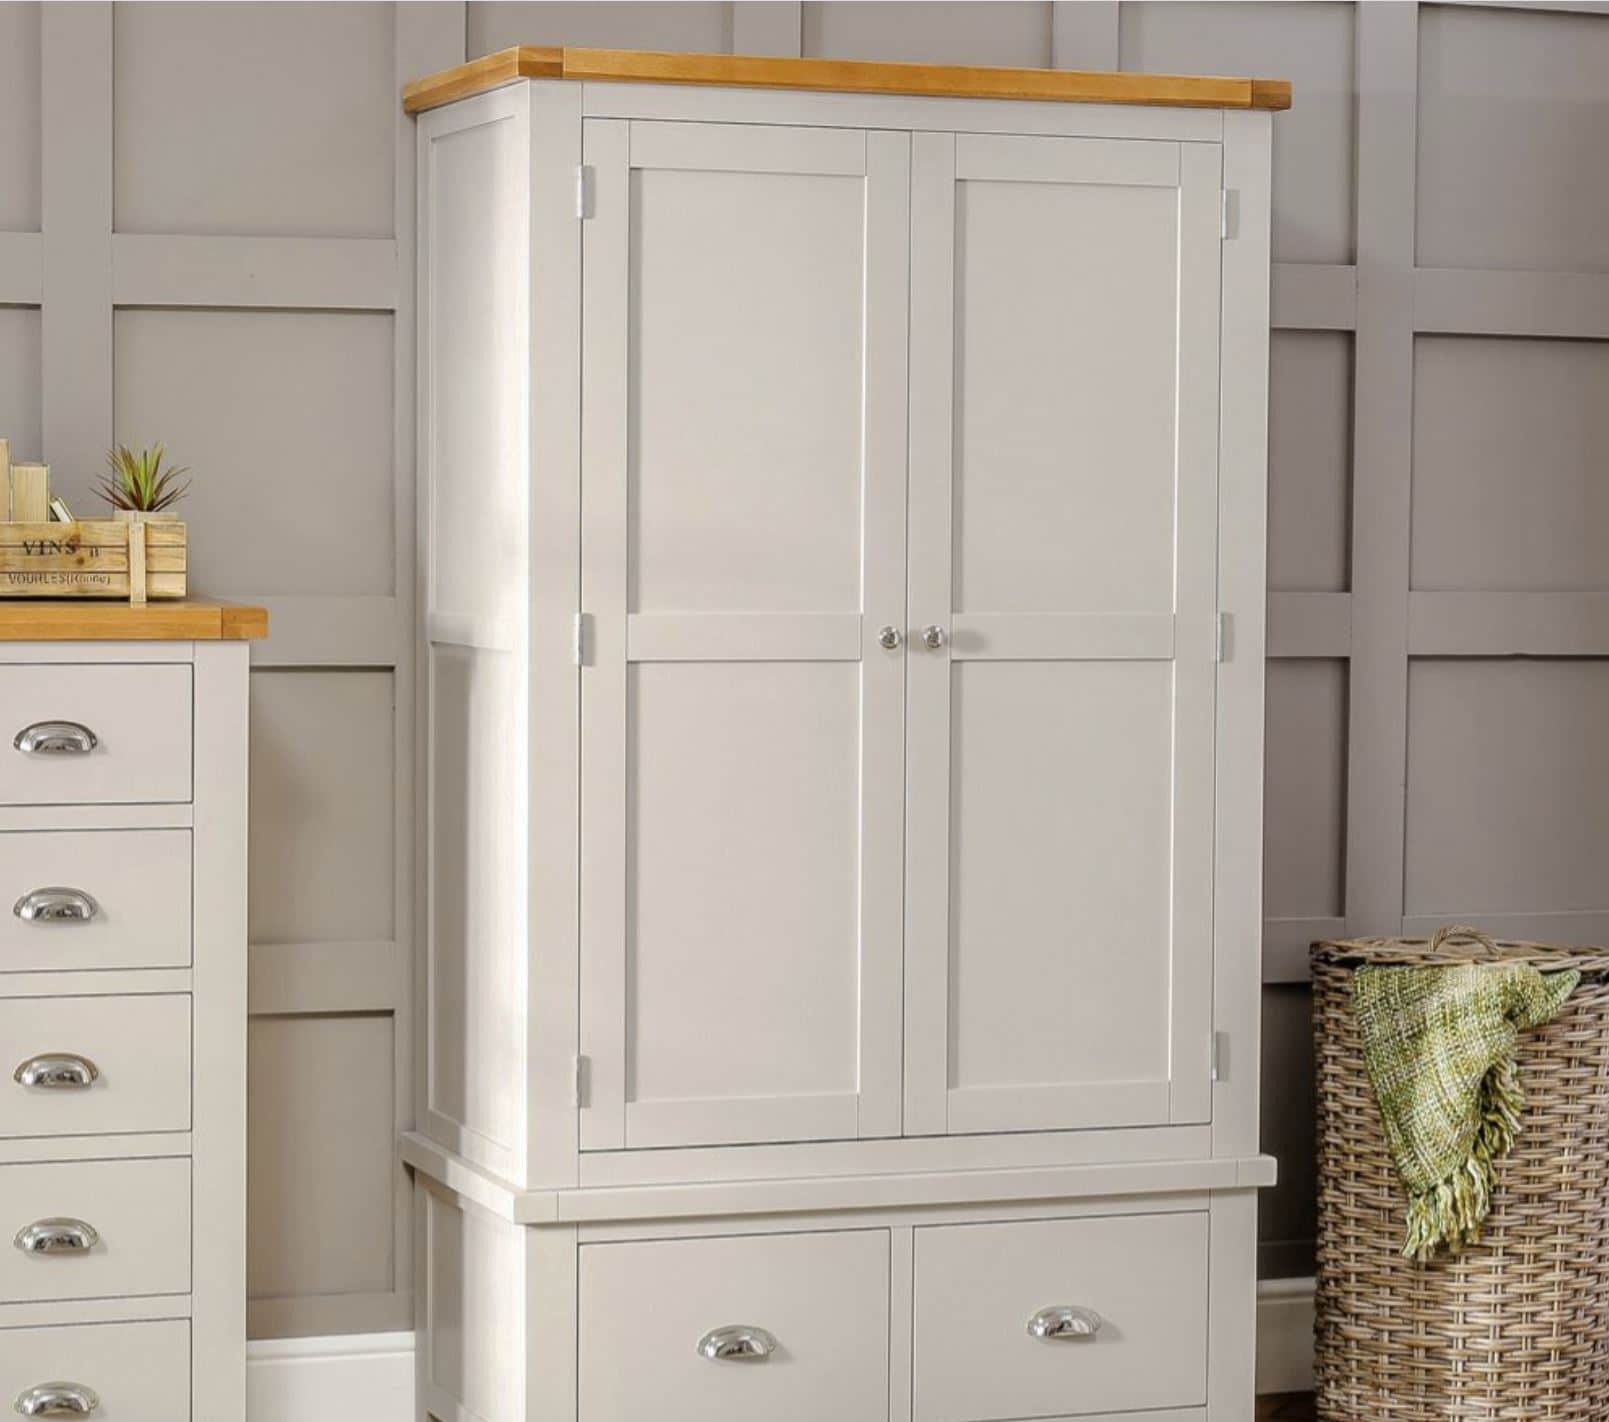 Make the Most of Your Space with Our Downton Painted 2 Door Wardrobe